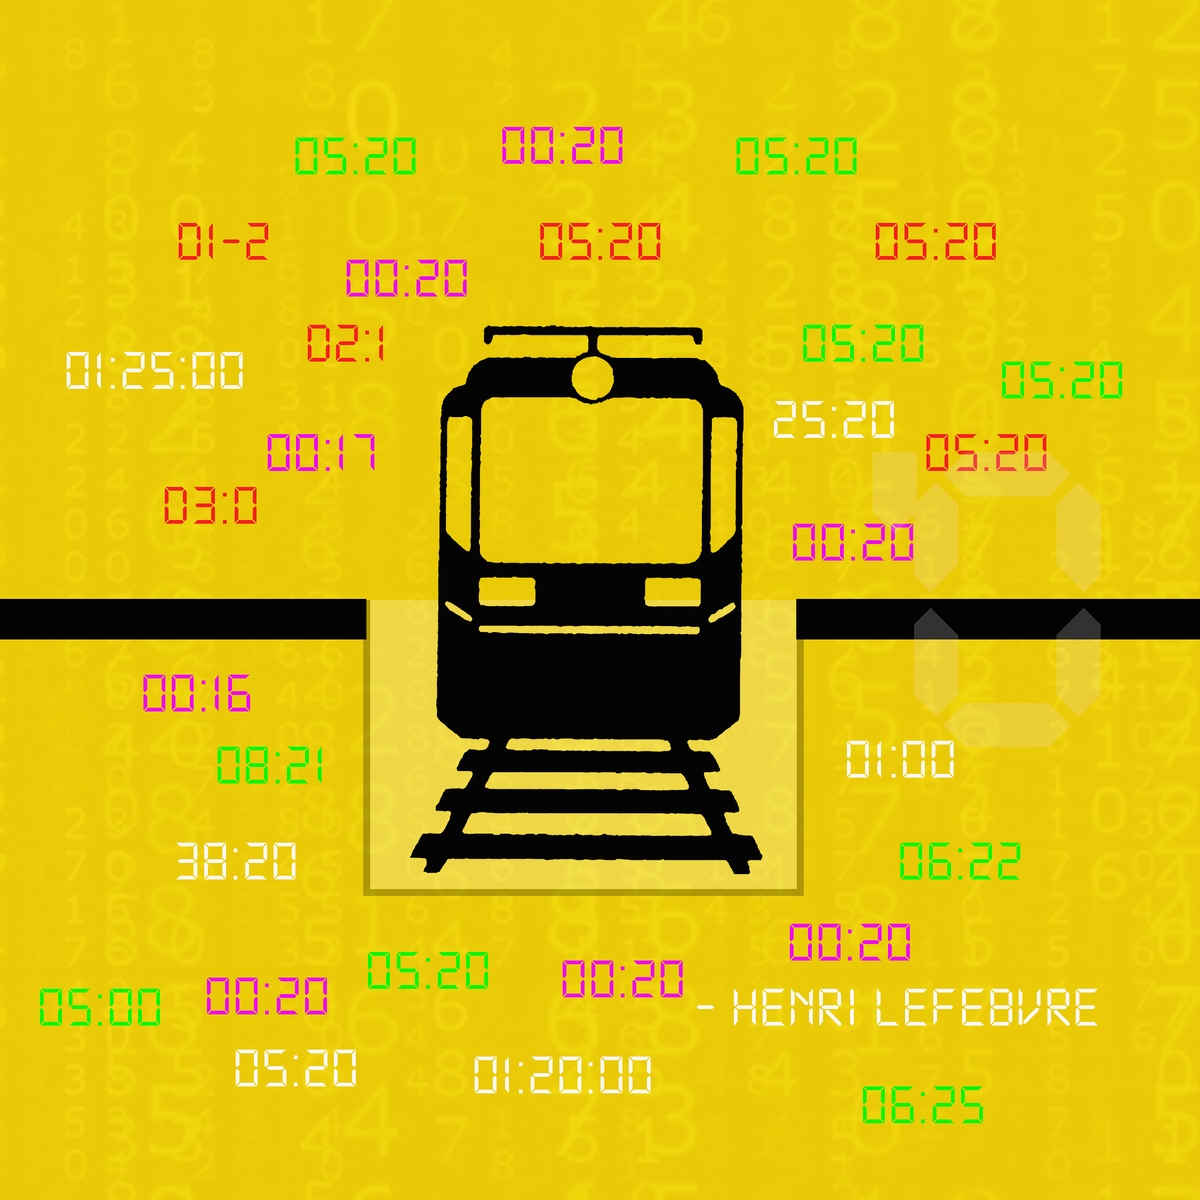 Process photograph from the 2018 rendition of the City Research Studio exchange with the African Centre for Cities. A graphical representation of a train on tracks surrounded by digital time signatures.
